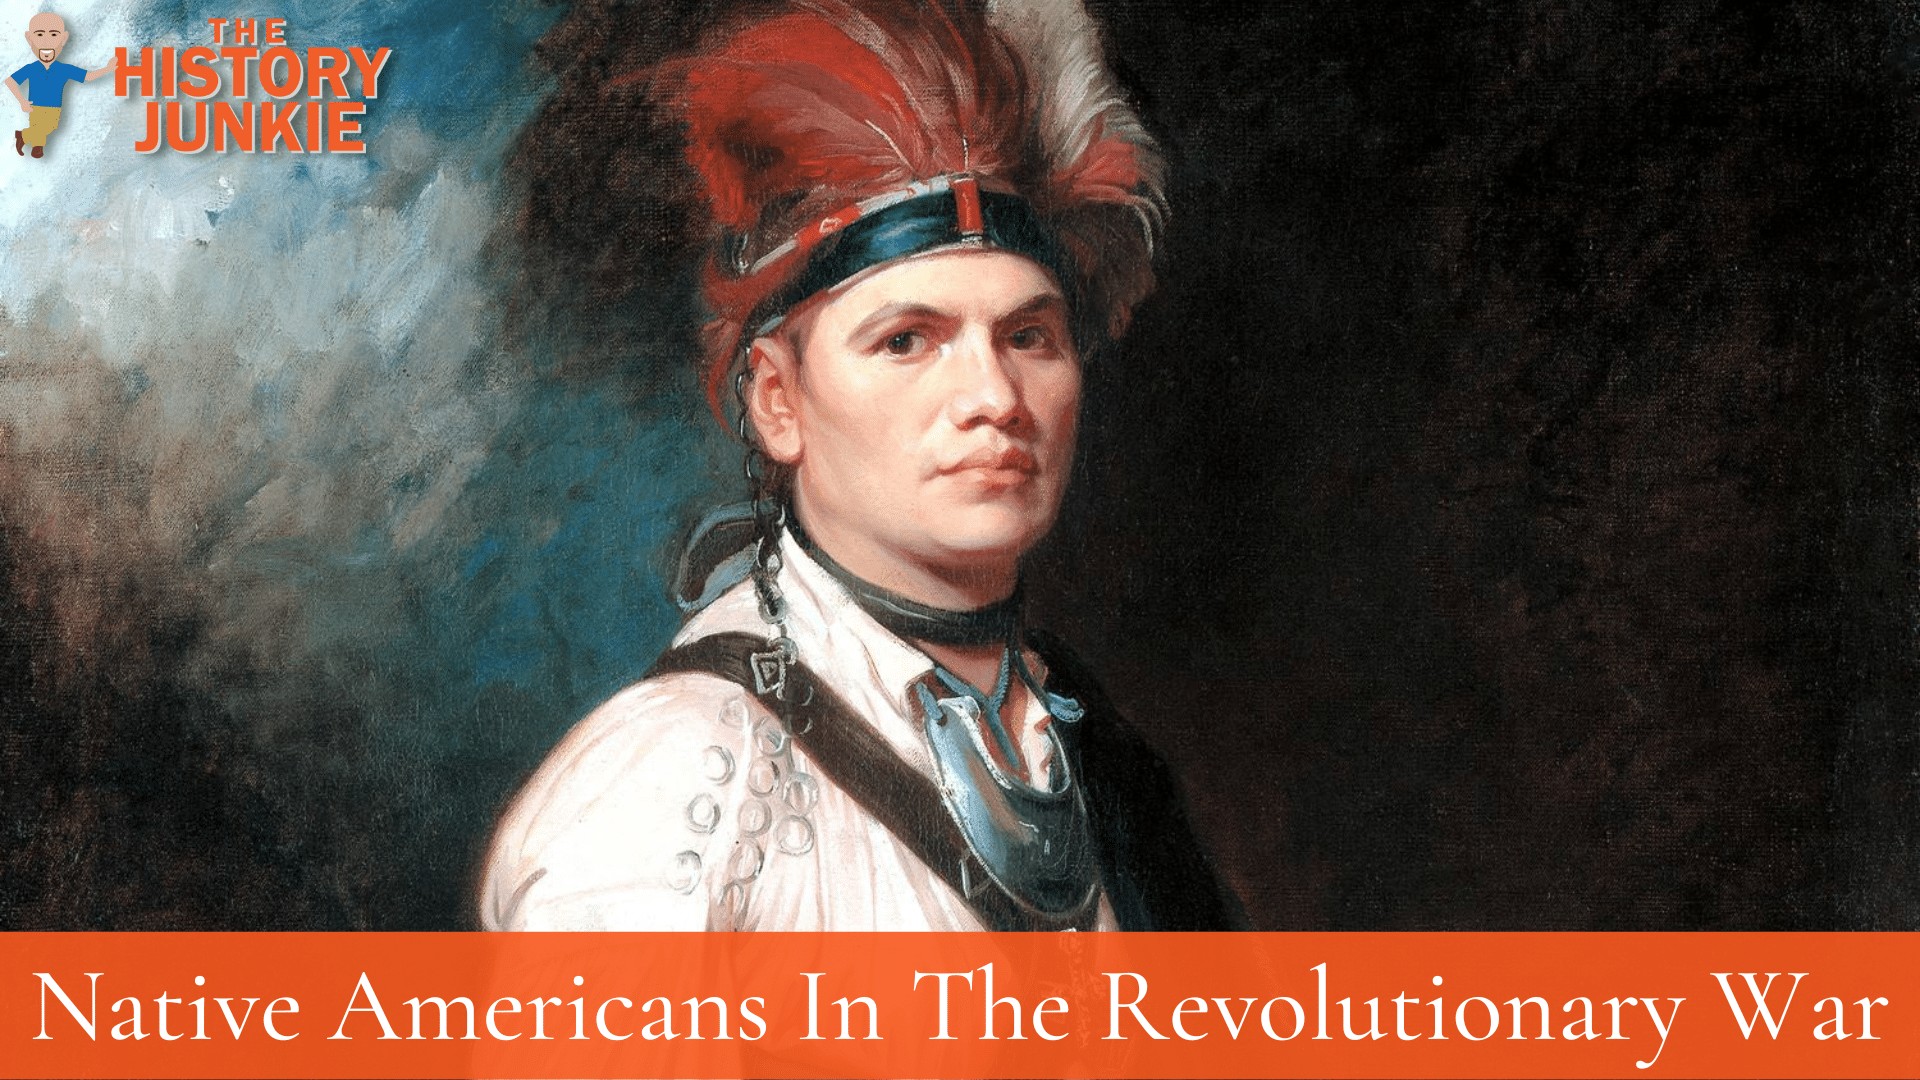 Native Americans in the Revolutionary War